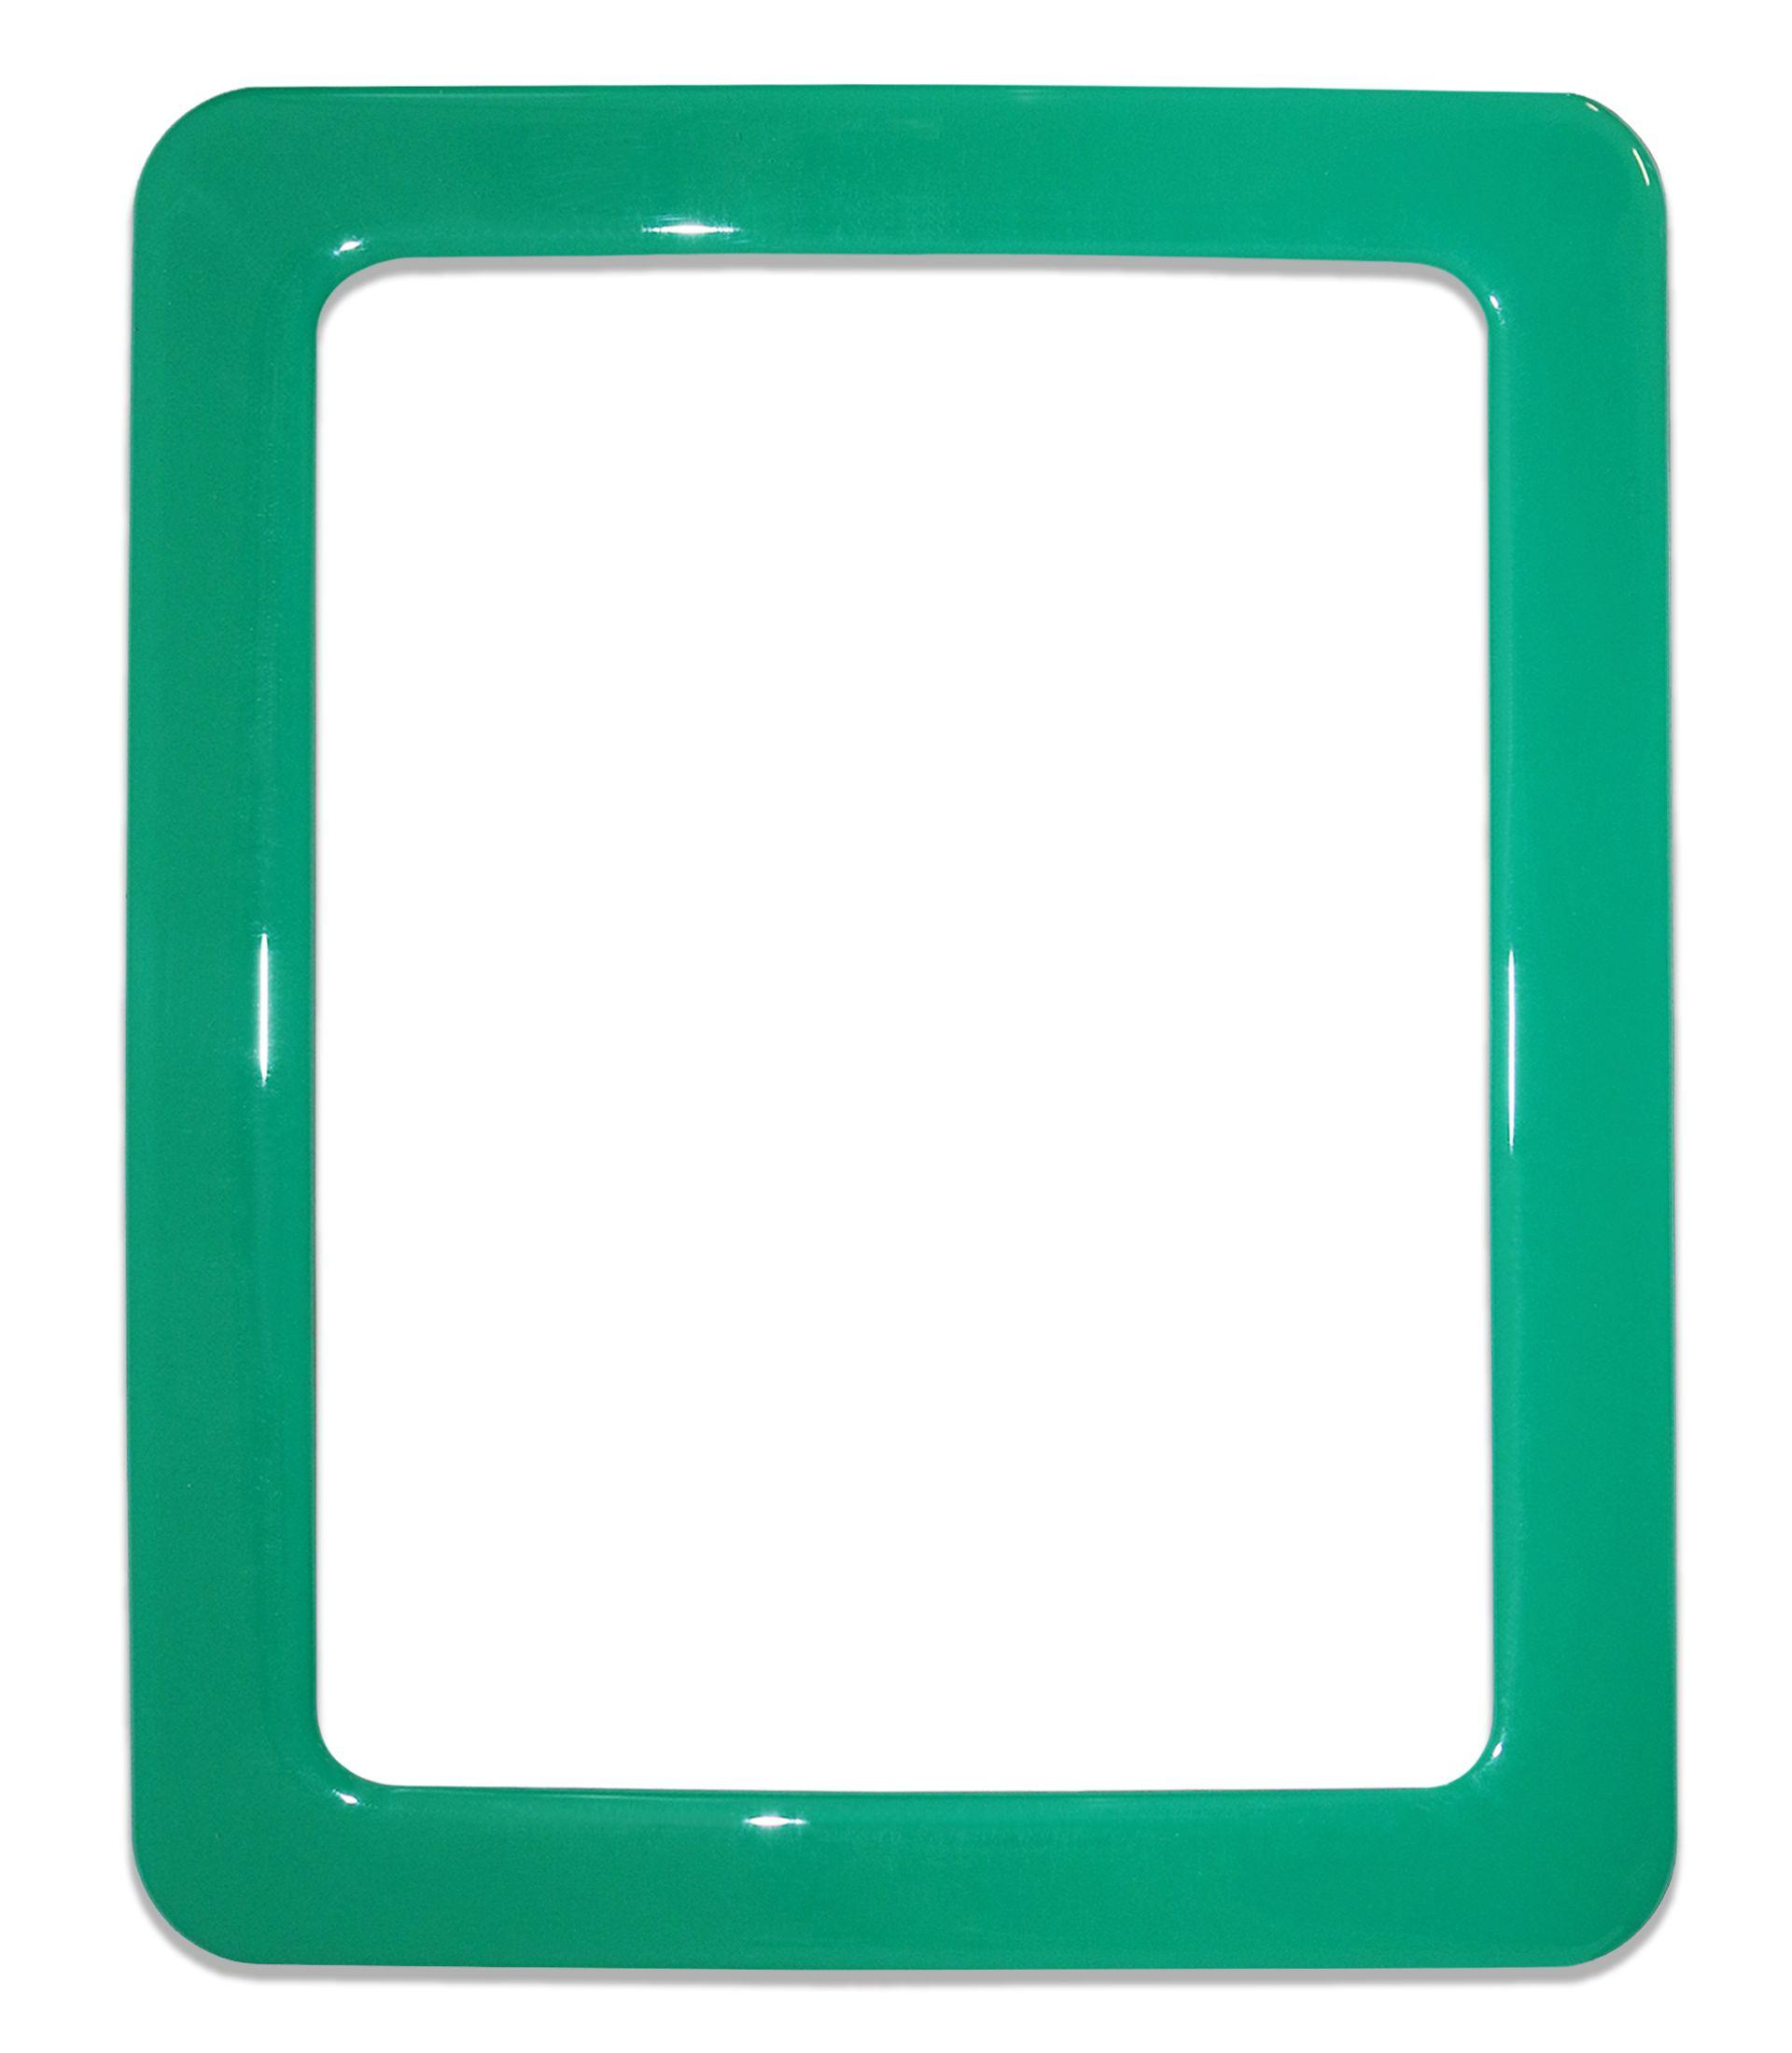 Magnetic self-adhesive frame size 19.0 x 23.8 cm - green